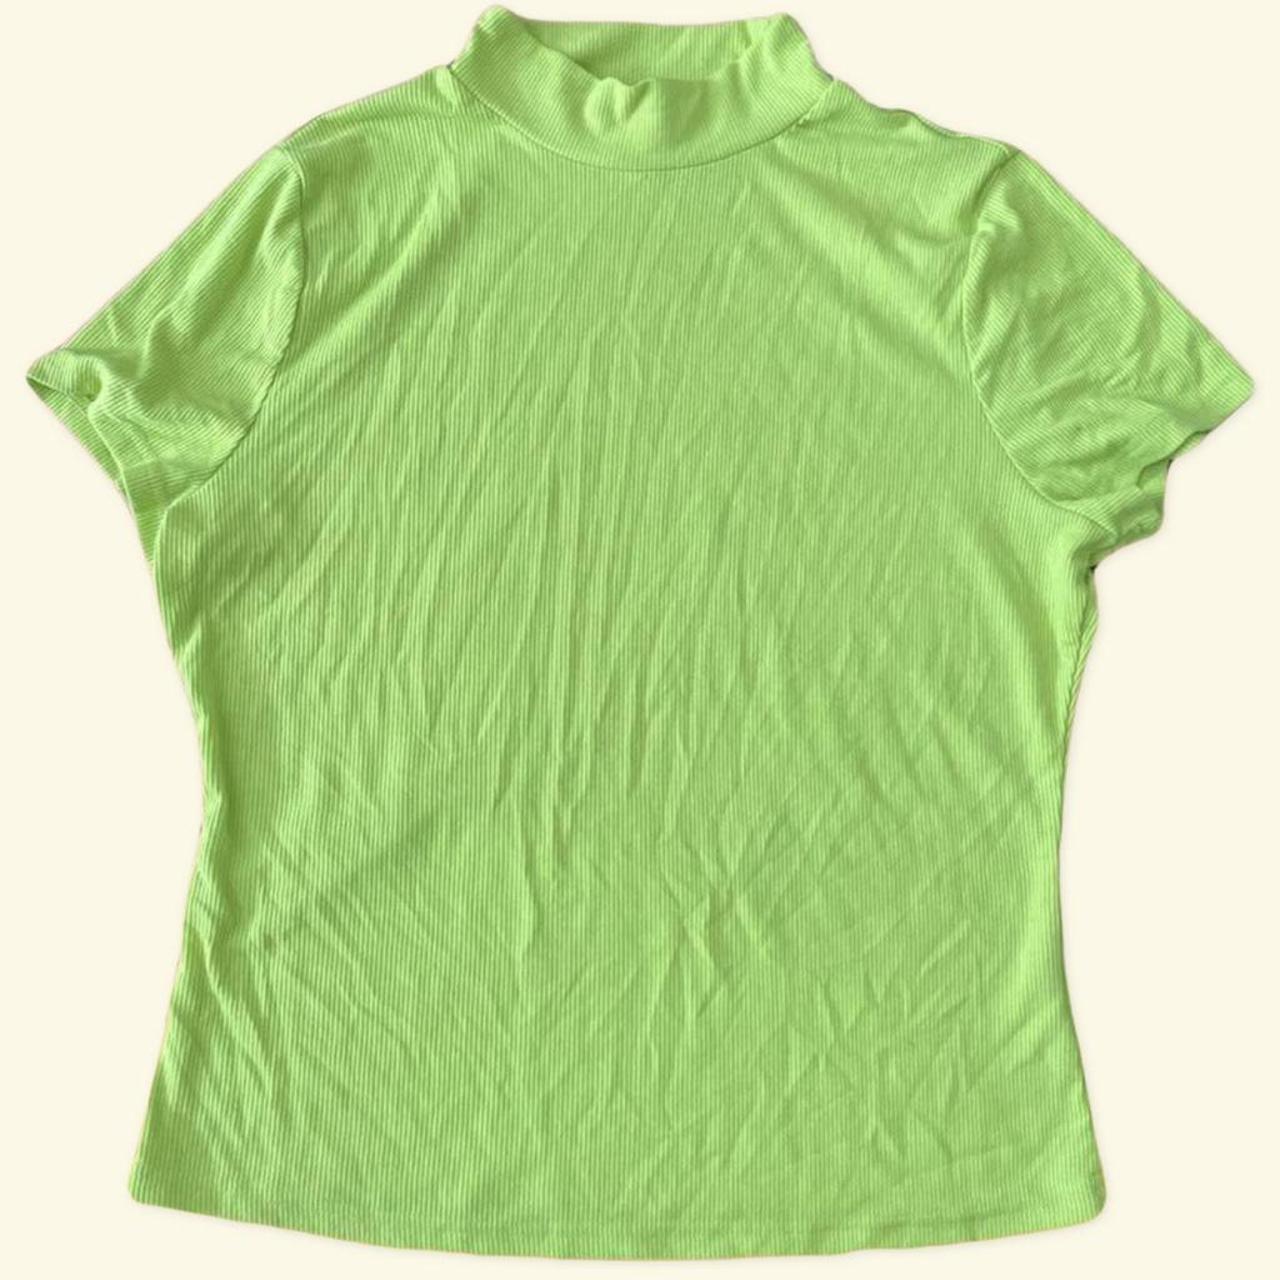 The most iconic Neon Lime Green short sleeve top you... - Depop